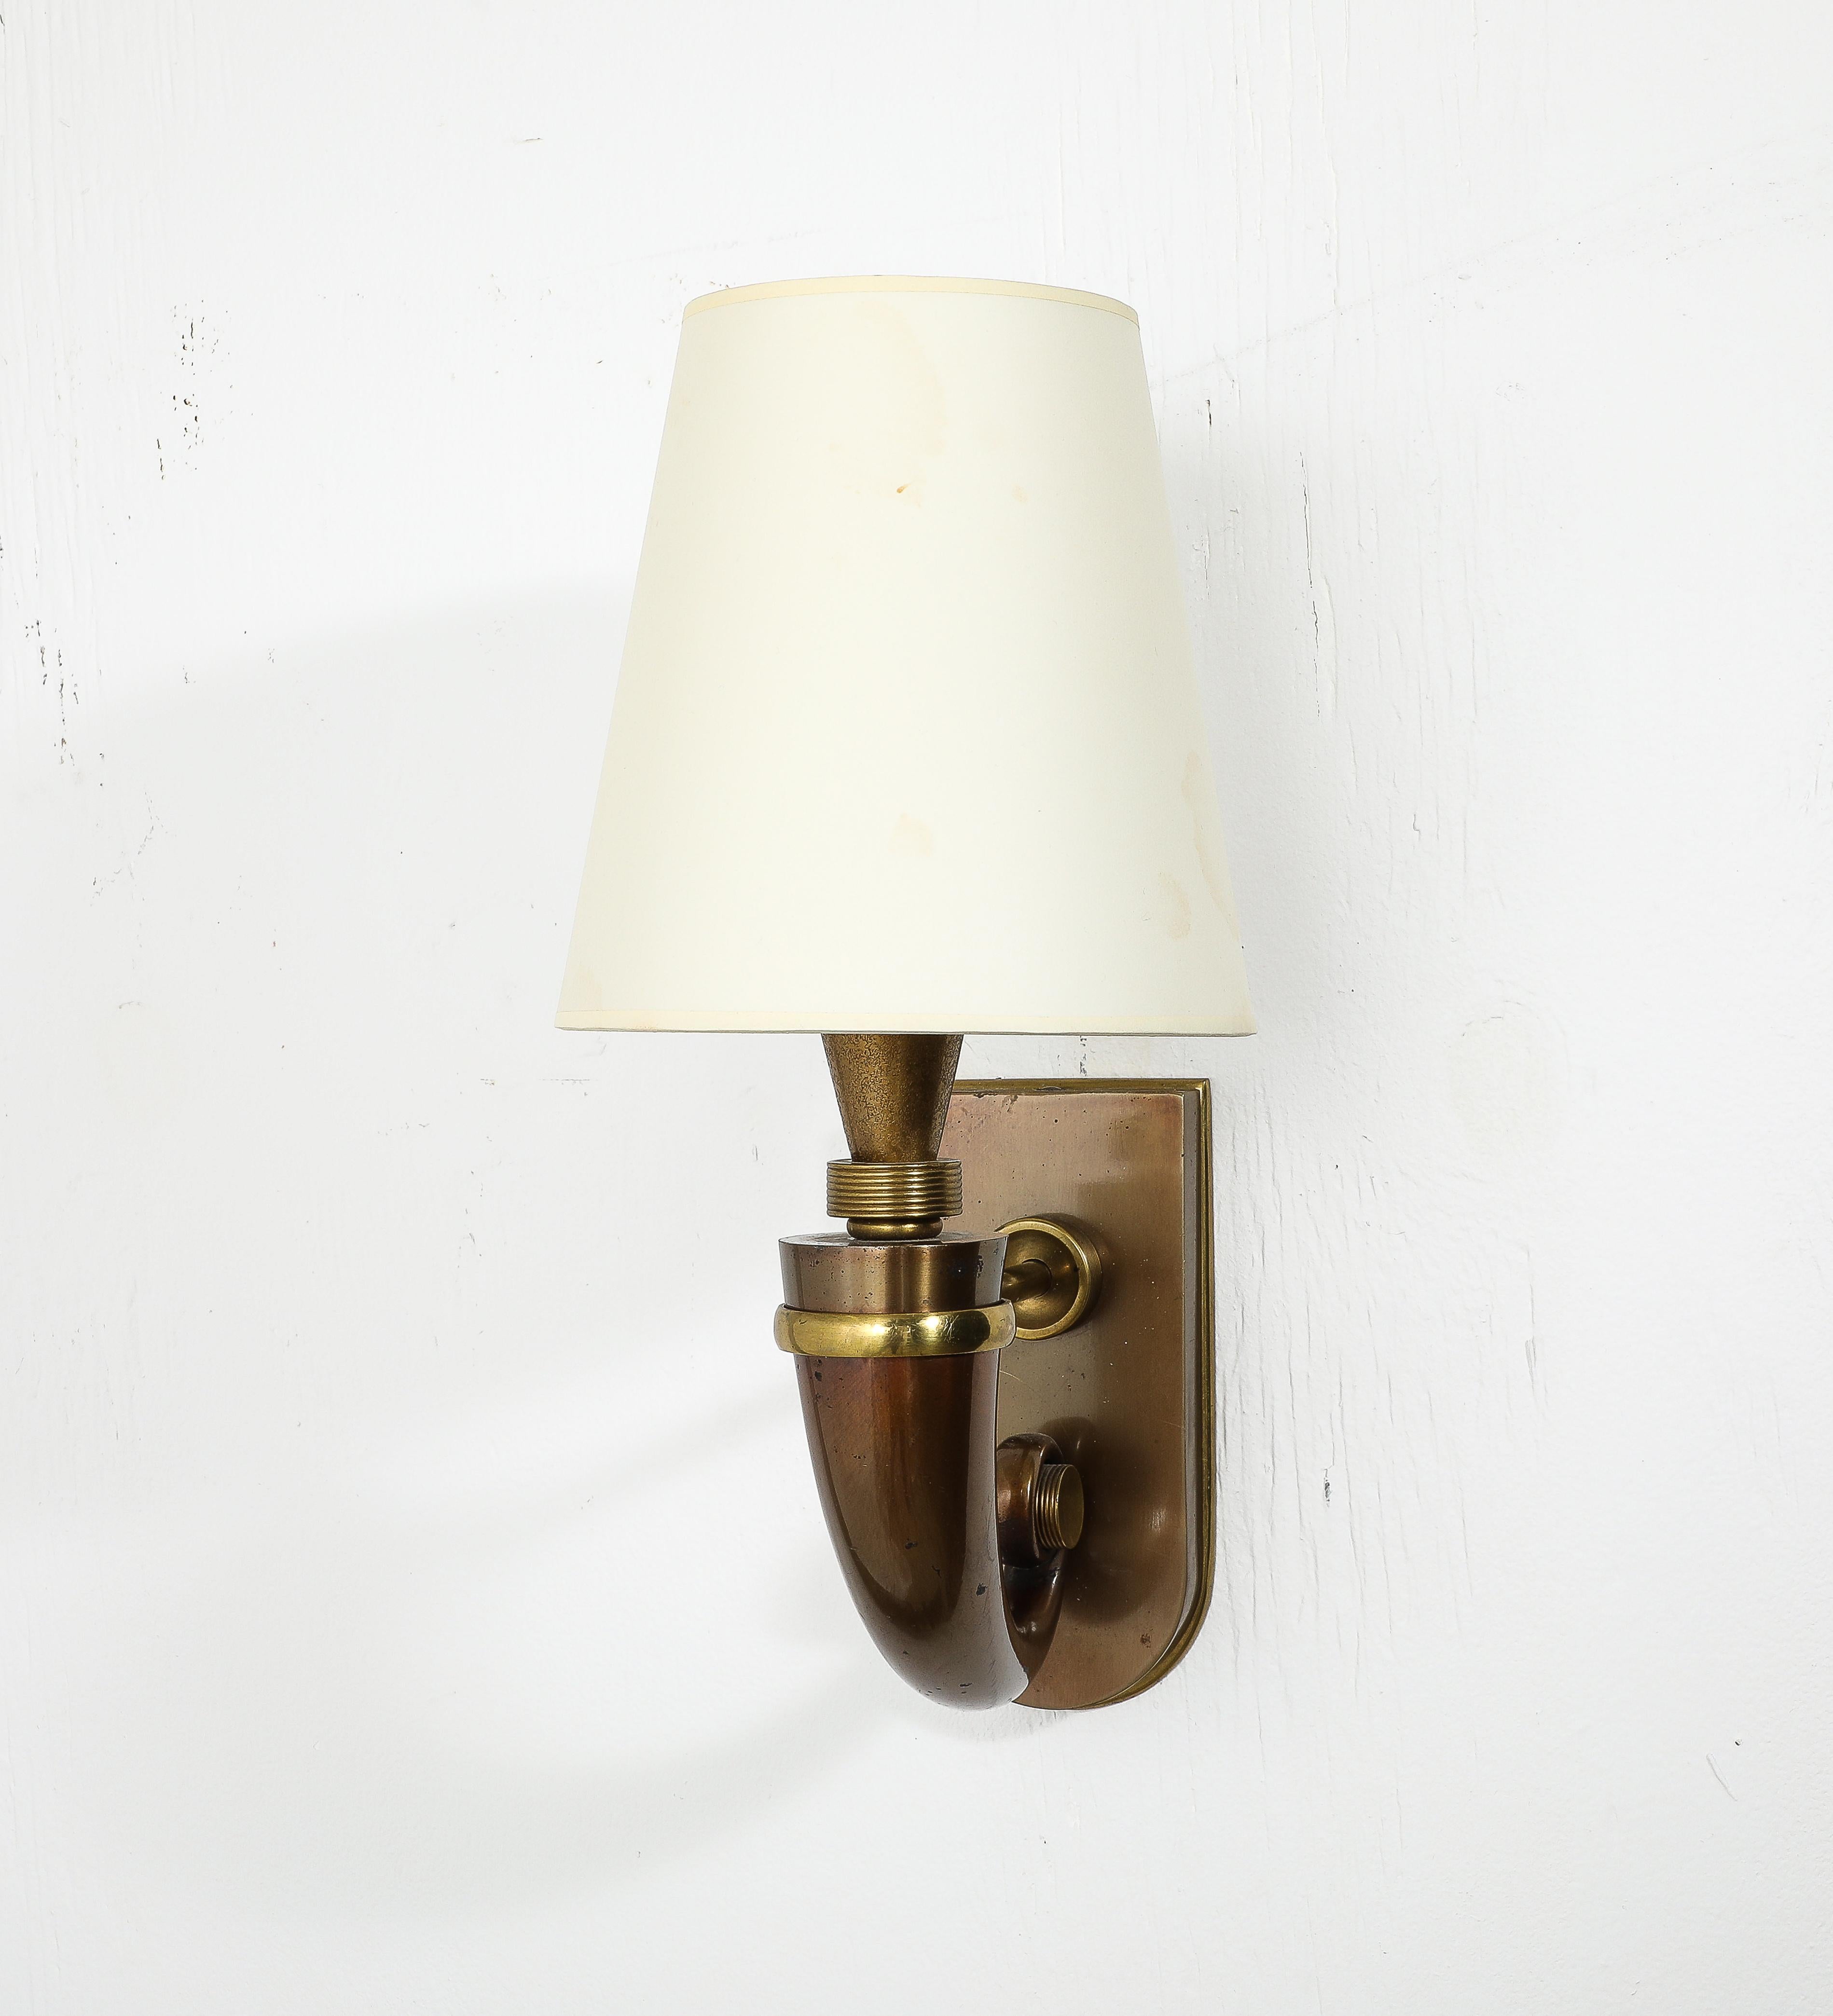 Art Deco Maison Jansen Style Sconces in Patinated Mixed Metals, France 1930’s For Sale 8